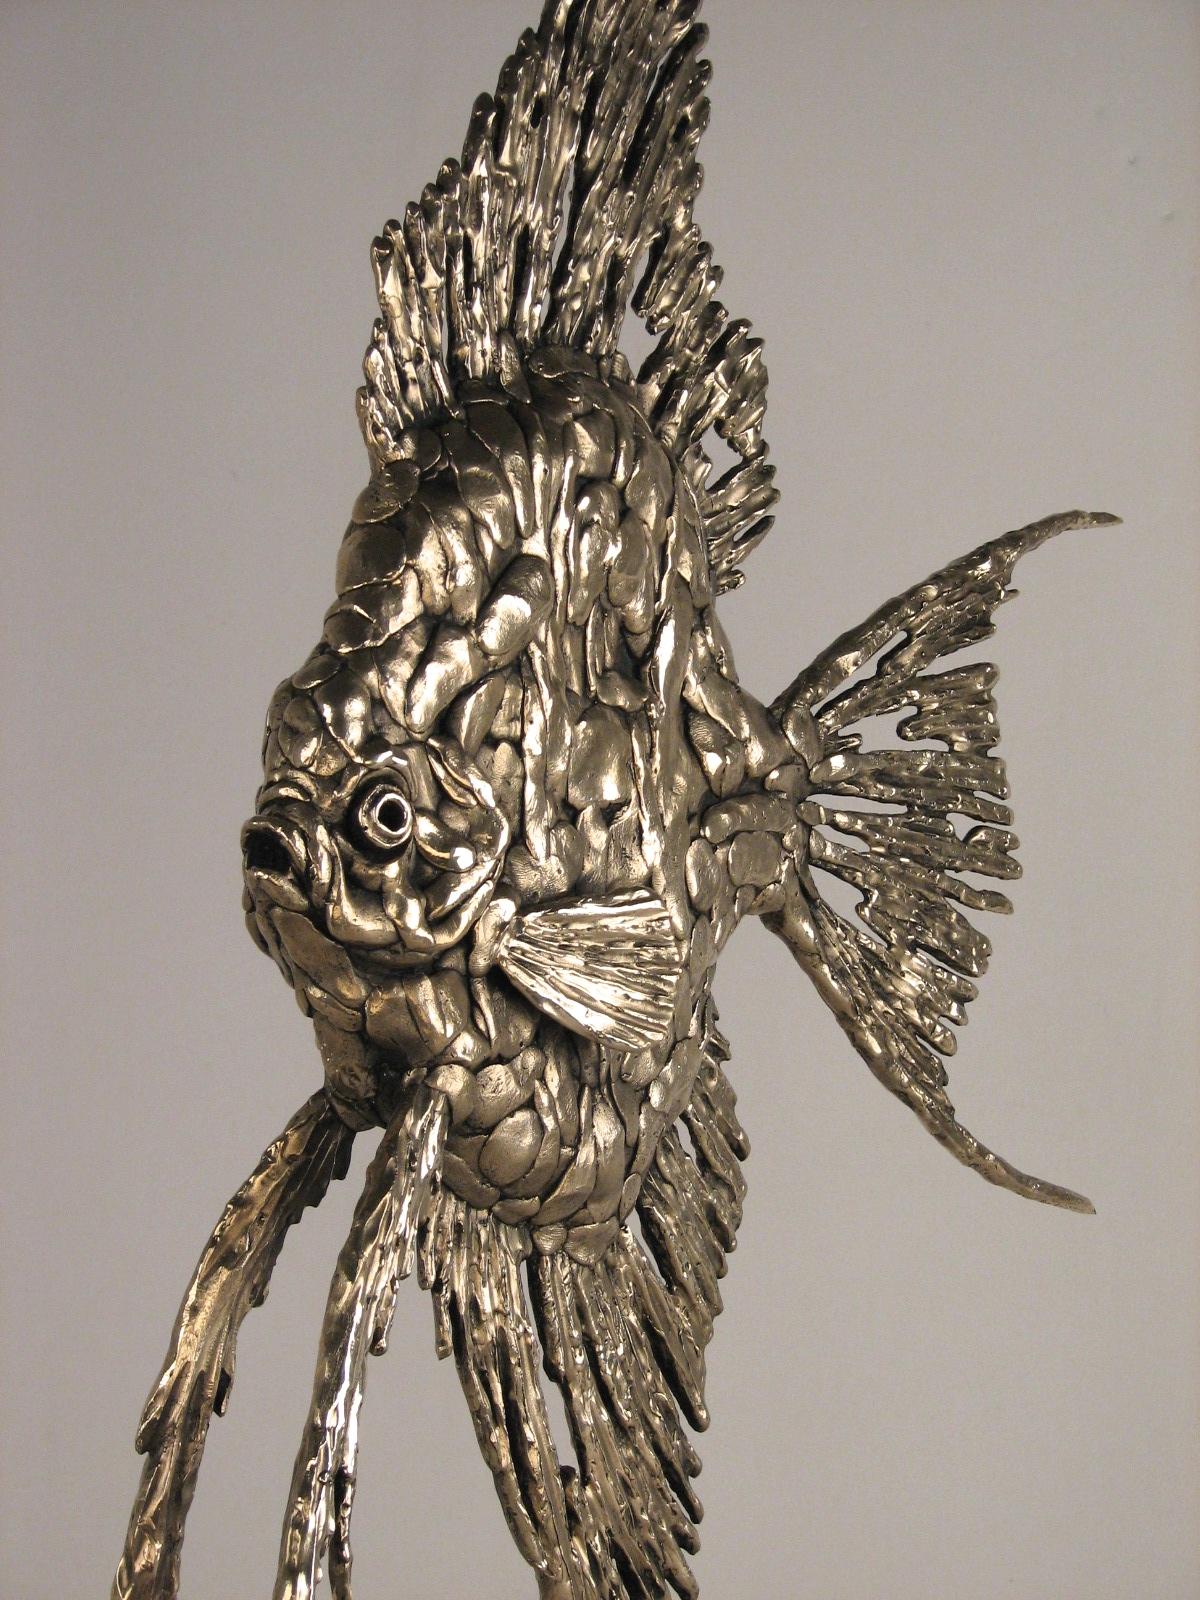 Angel Fish-original abstract wildlife bronze sculpture for sale-contemporary Art - Abstract Impressionist Sculpture by Andrzej Szymczyk